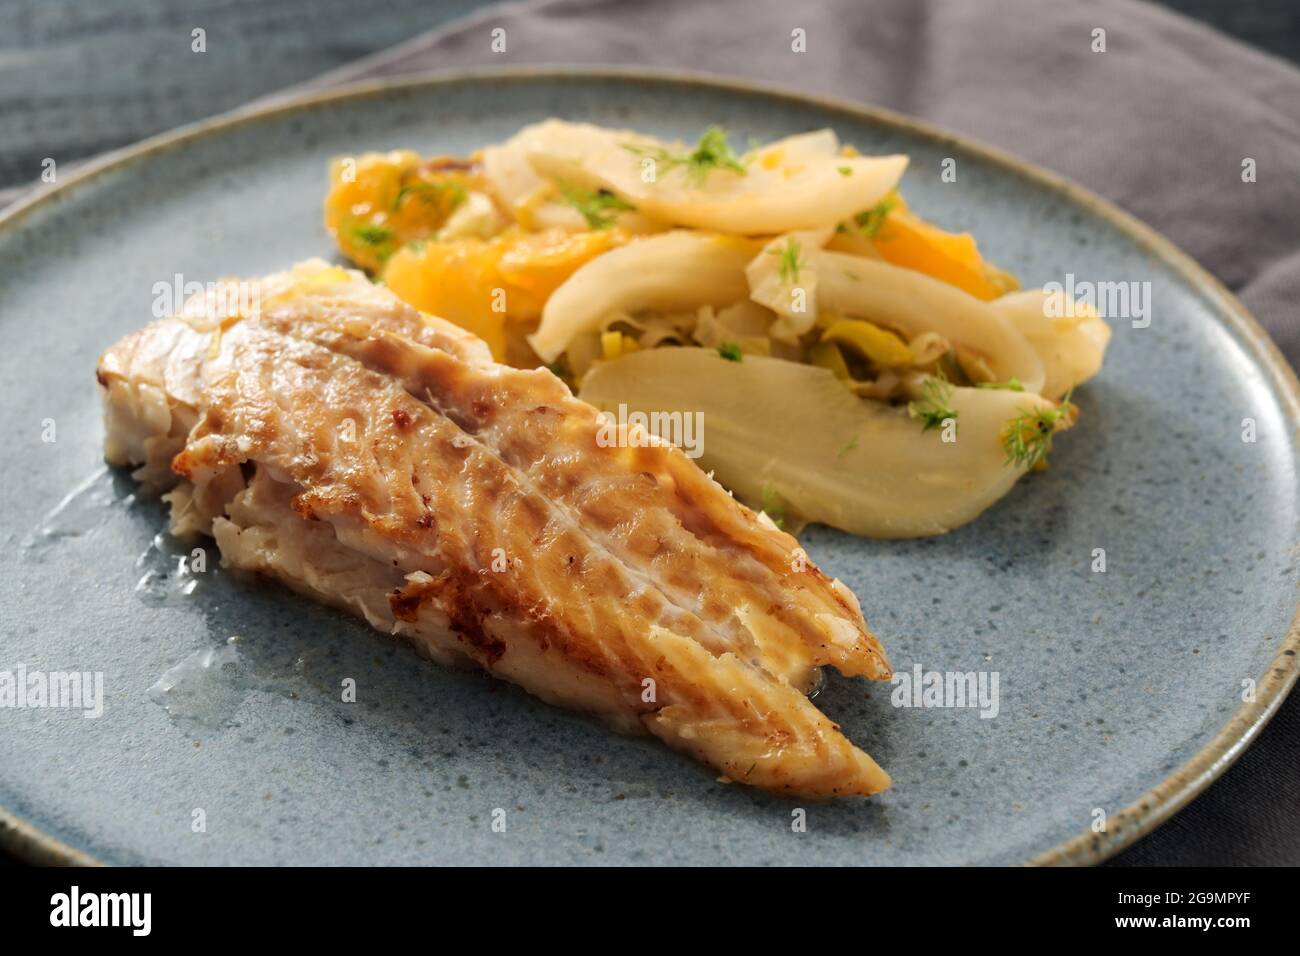 Sauteed cod fish with fennel vegetable and orange slices served on a blue plate, selected focus, narrow depth of field Stock Photo